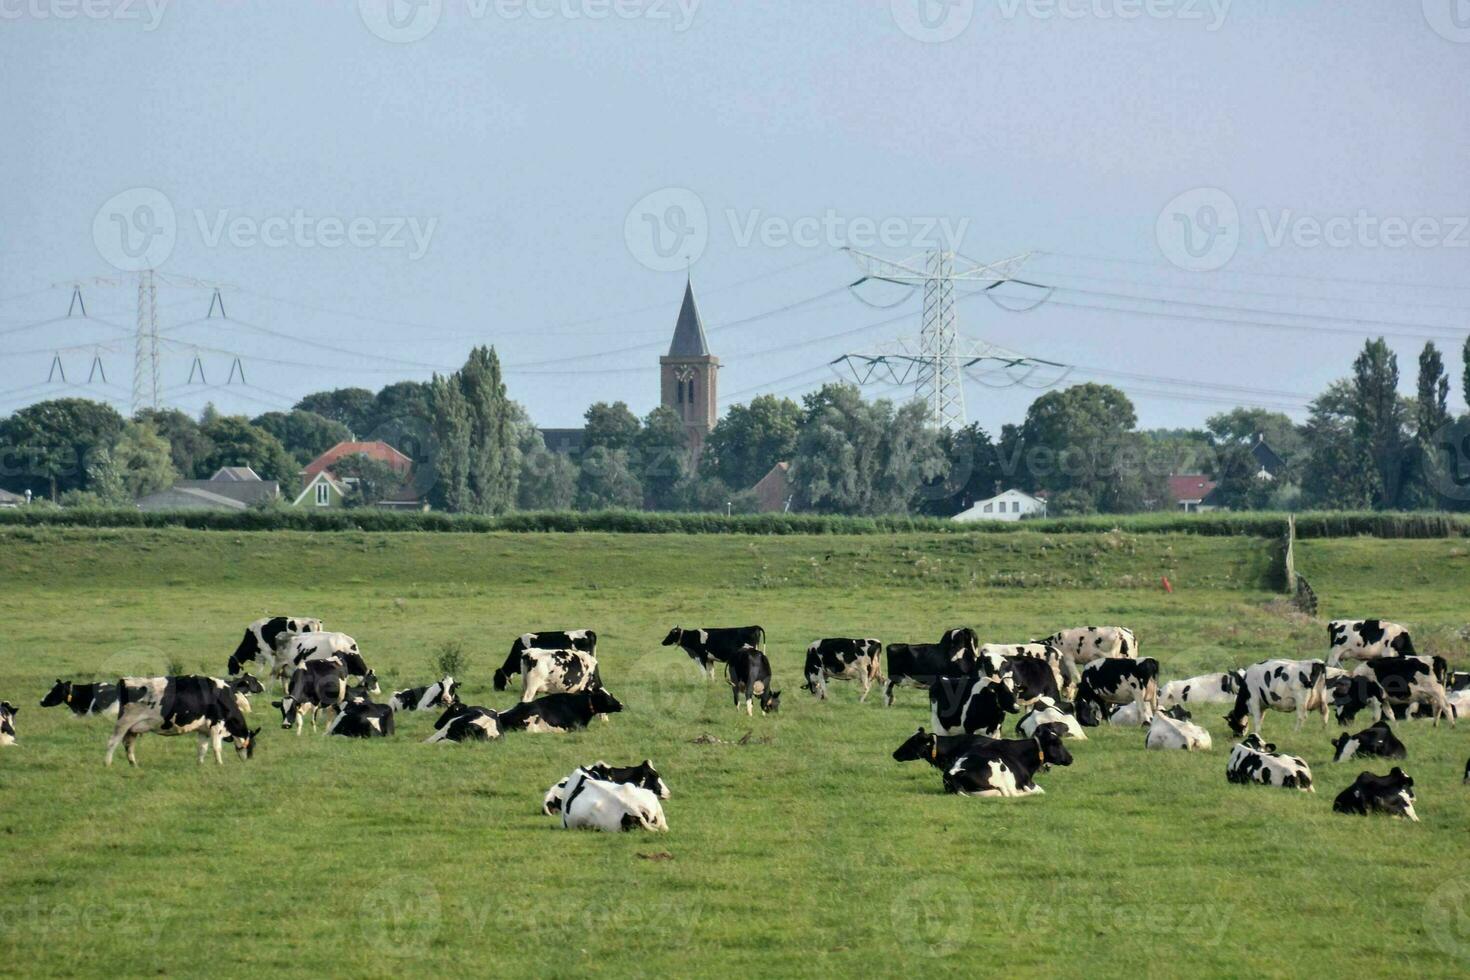 cows in a field photo